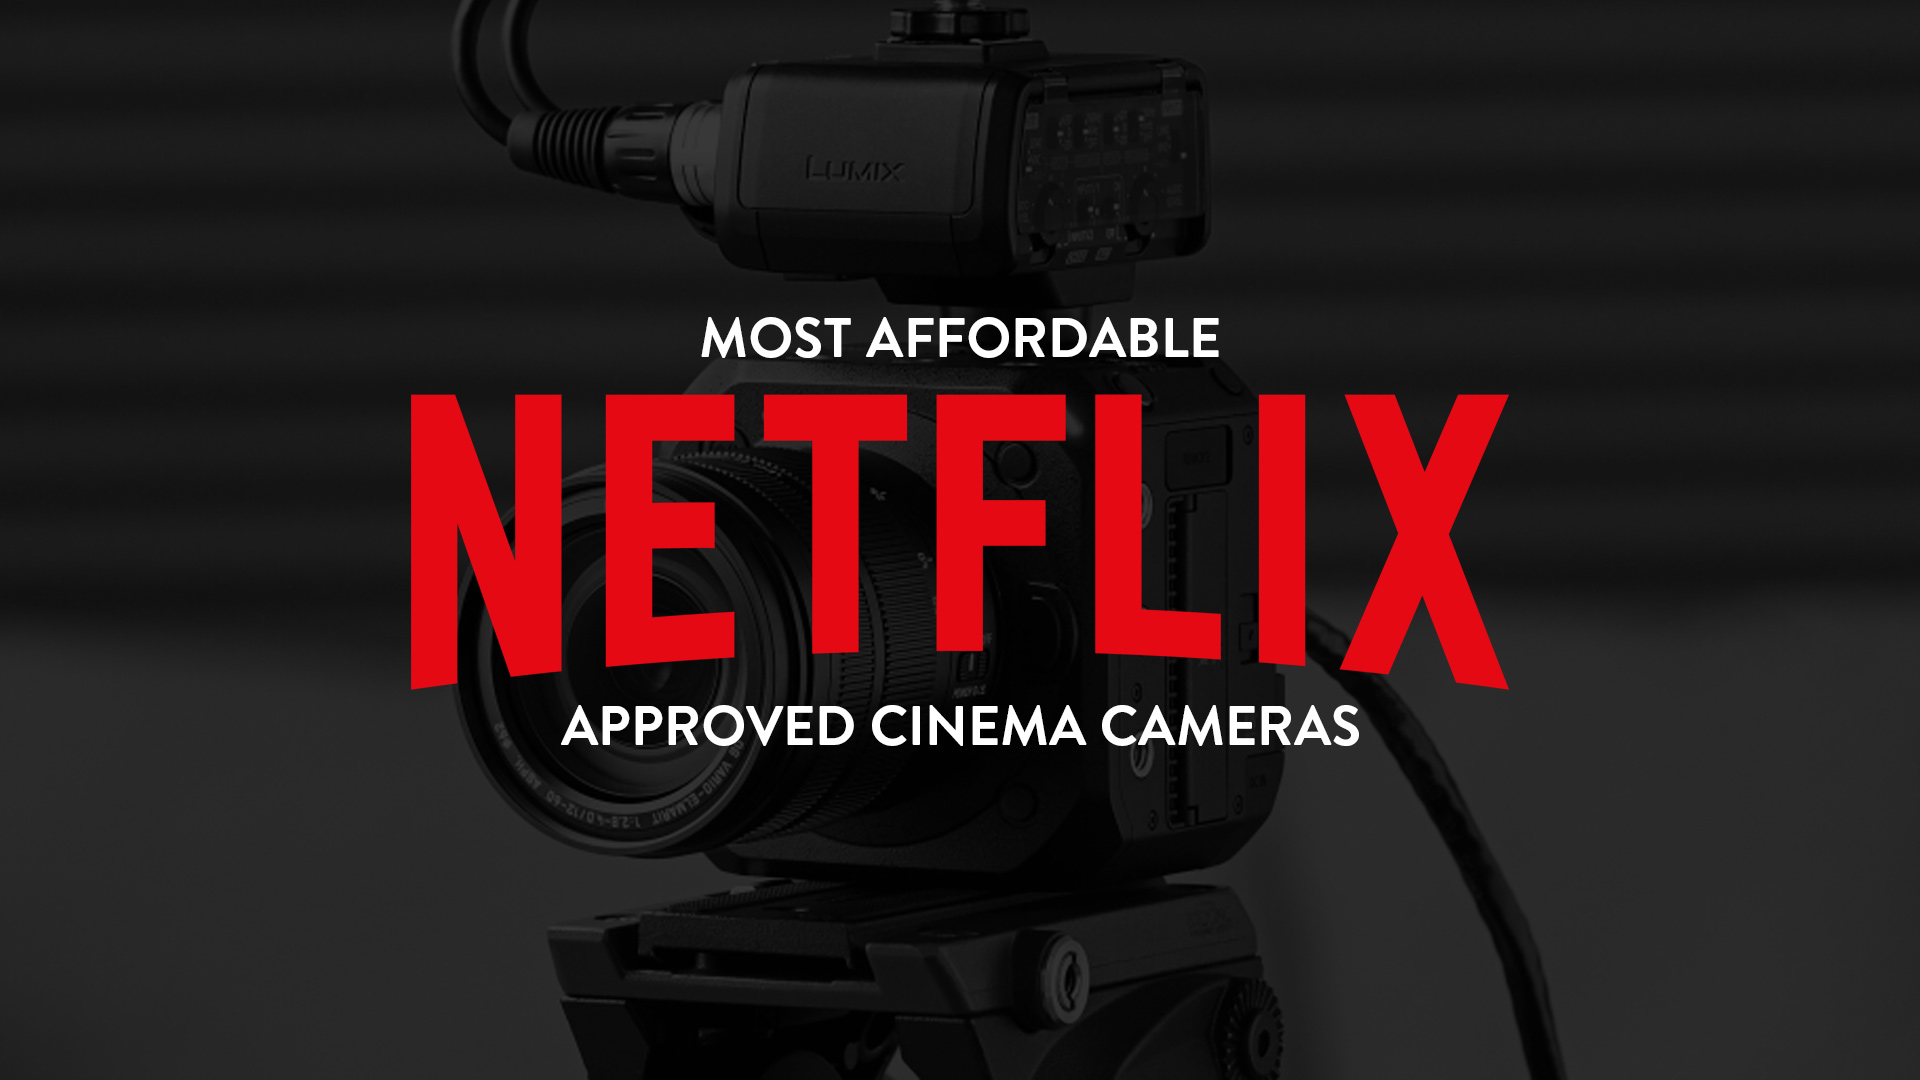 The 3 Most Affordable Netflix Approved Cinema Cameras You Can Buy Right